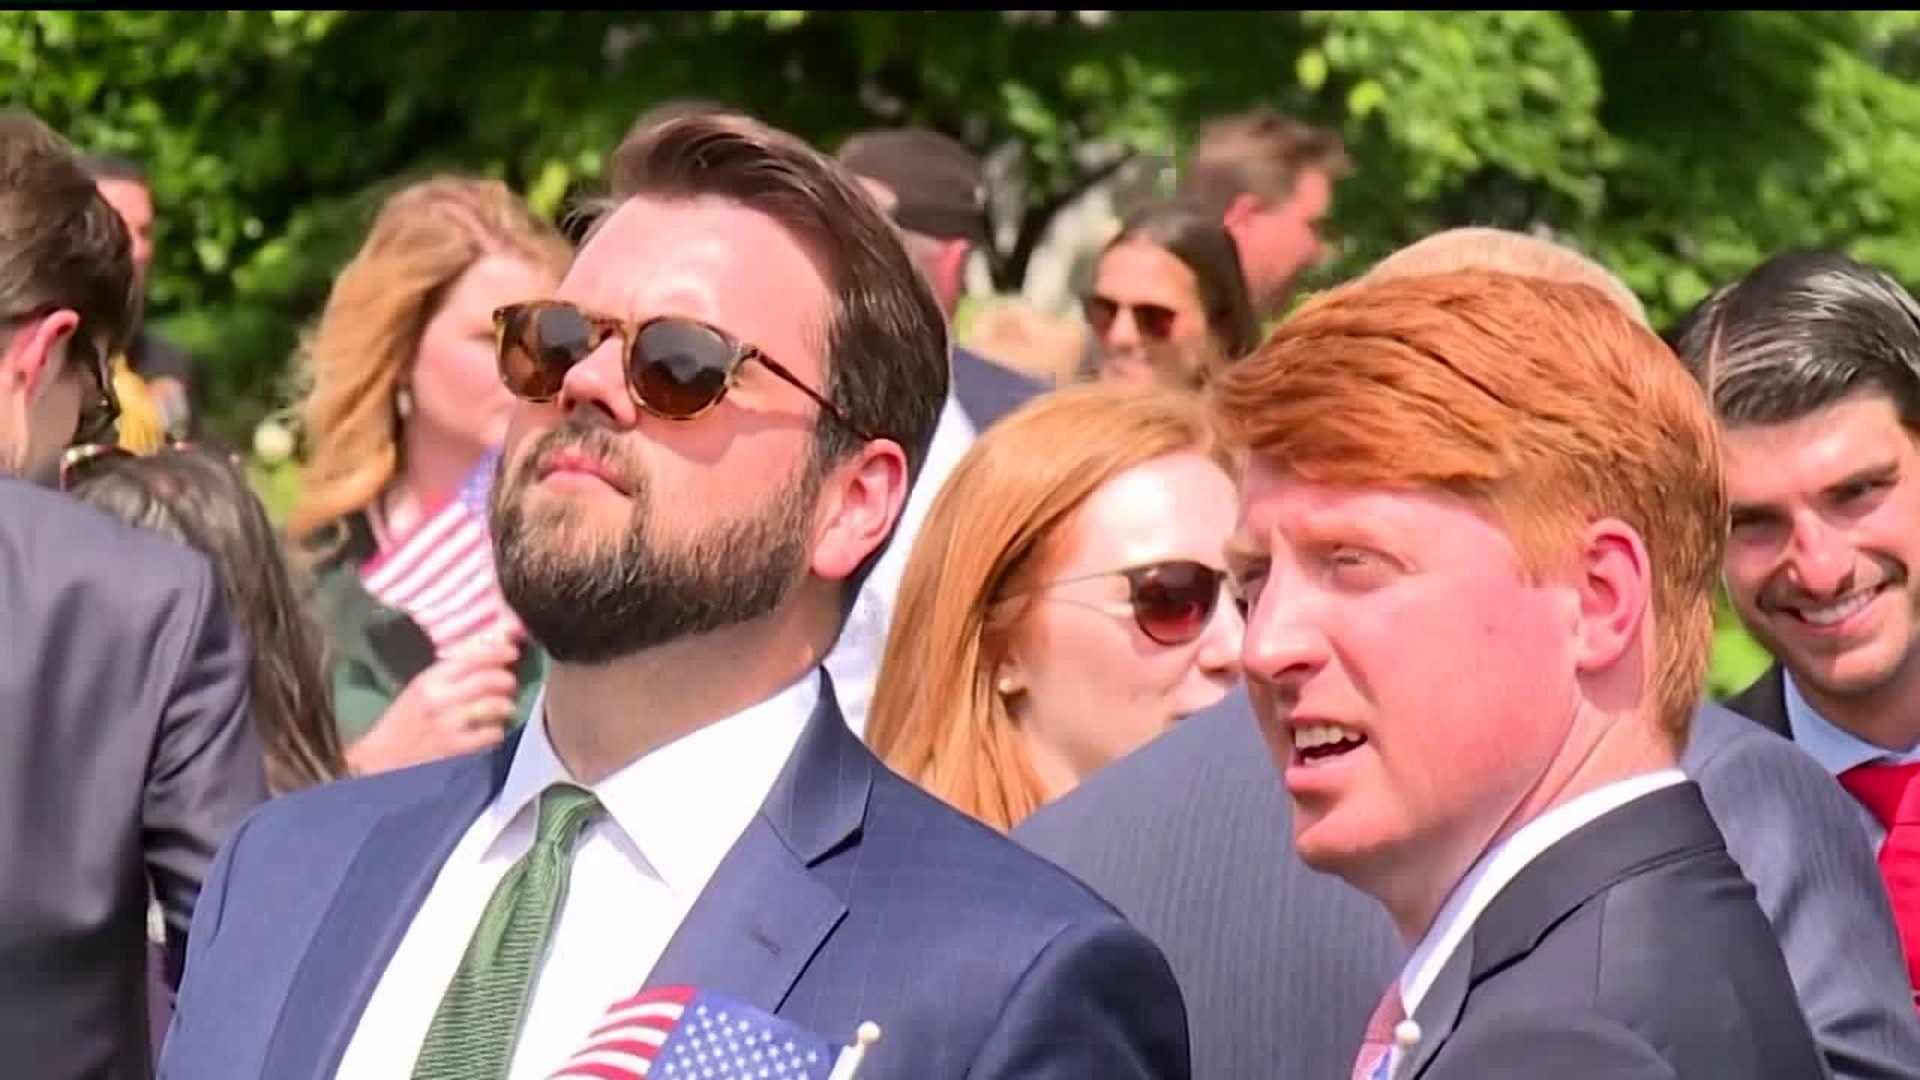 Local business owners attend White House after President disinvites the Eagles